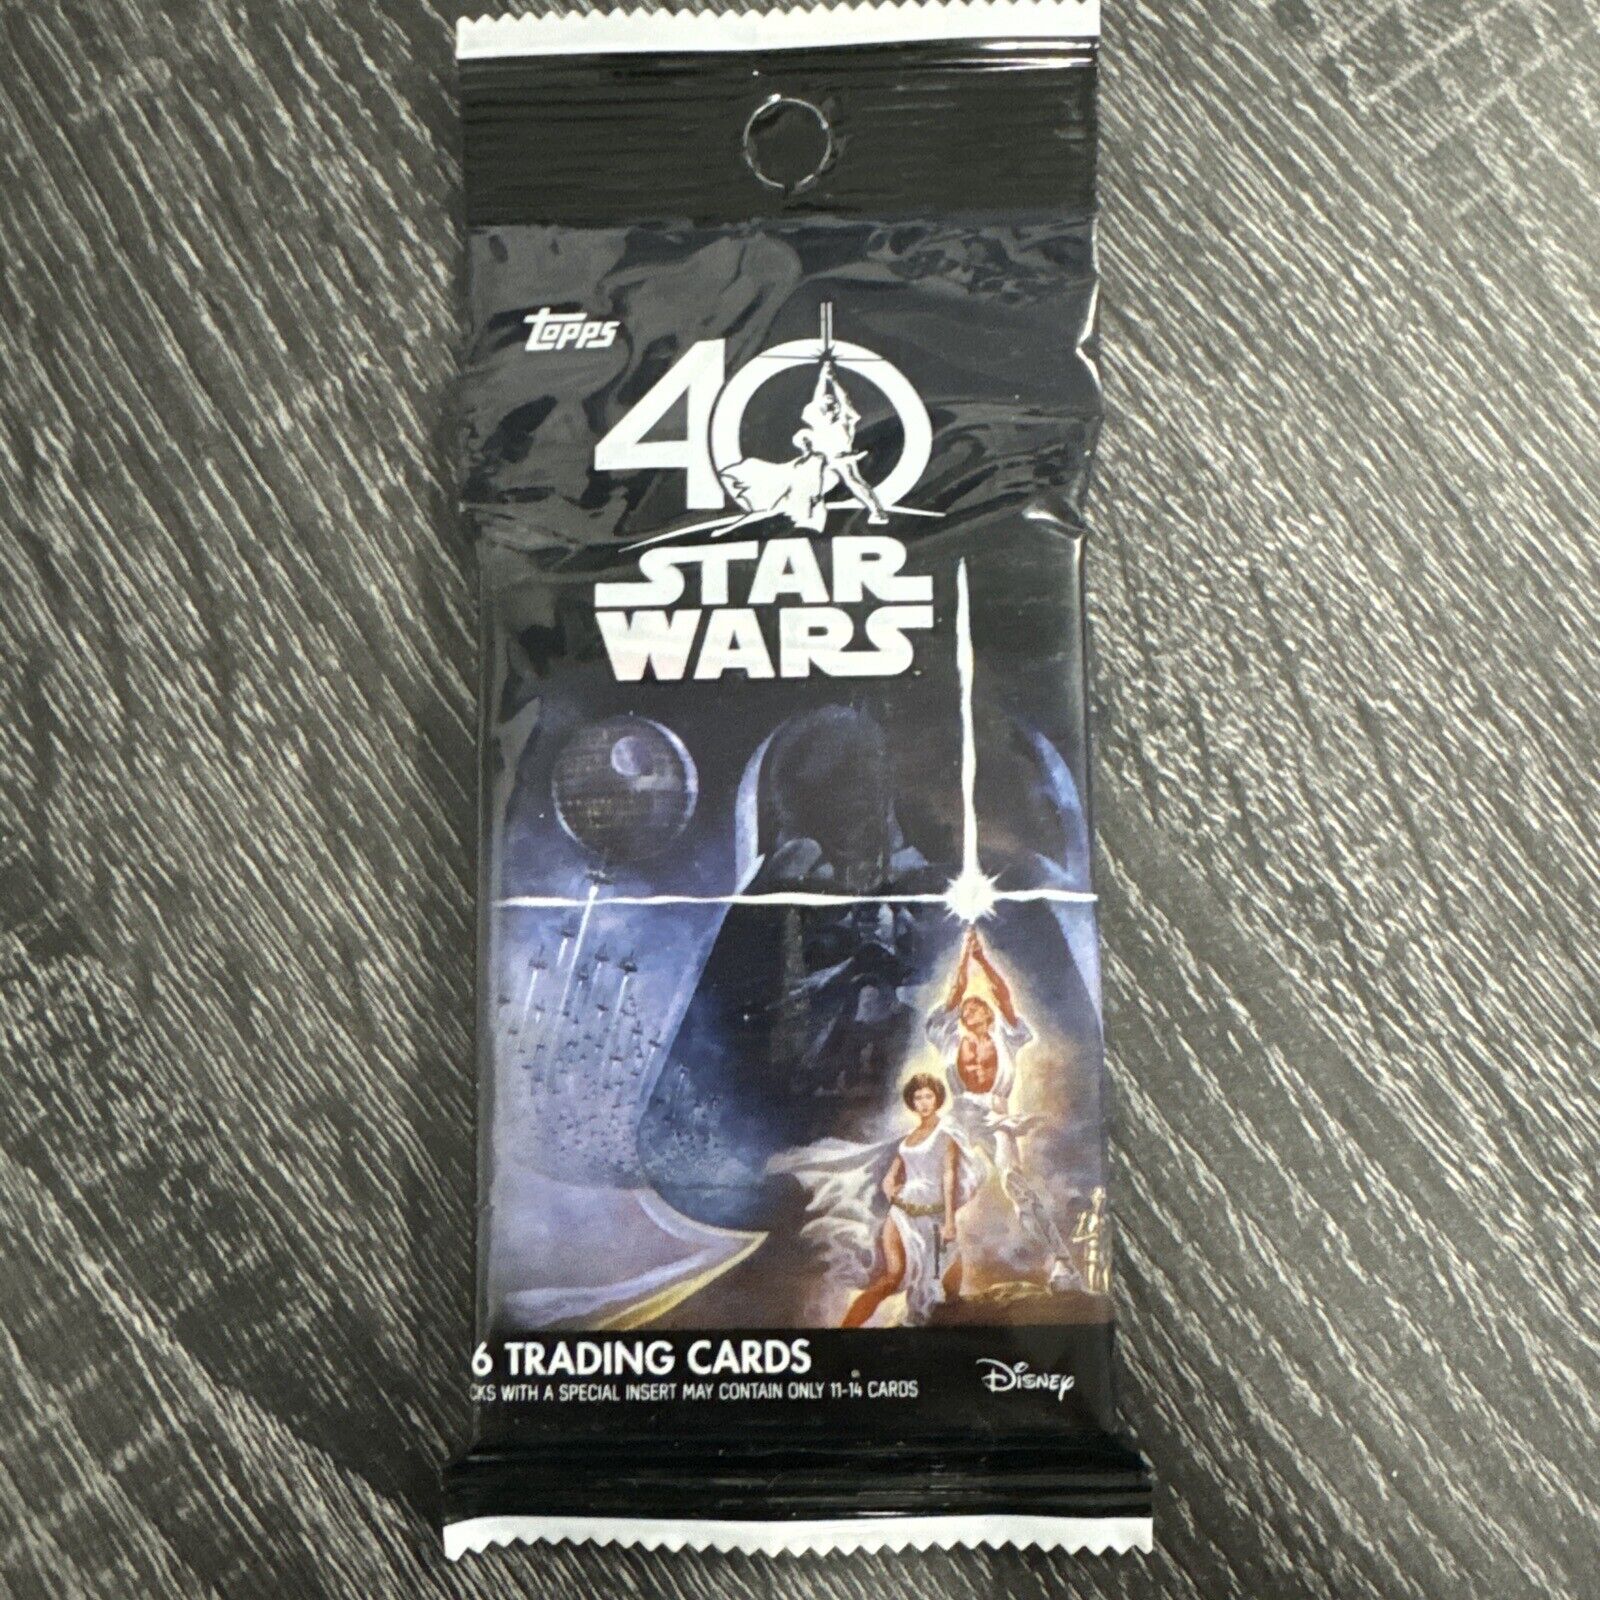 2017 TOPPS STAR WARS 40TH ANNIVERSARY FACTORY SEALED VALUE PACK 16 CARDS